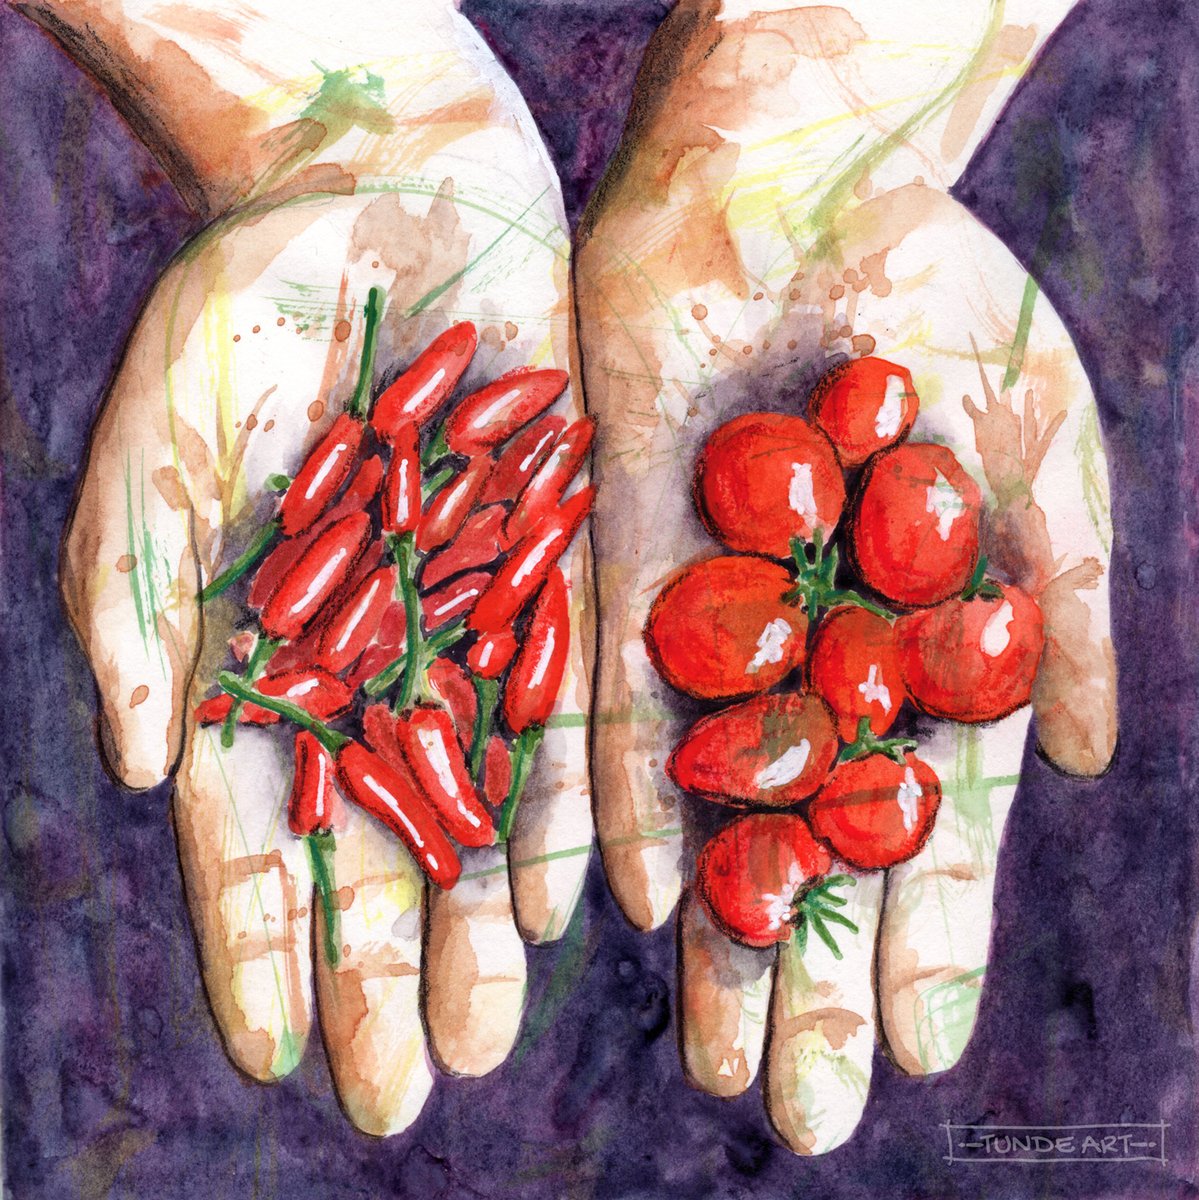 A part of the harvest from the windowsill. Mixed media on underpainted paper. 🍅🌶️🪴🎨🖌️

#growingfood #gardenerbyheart #tomato #chilli #tundeart #art #plants #mixedmedia #watercolour #painting #hands